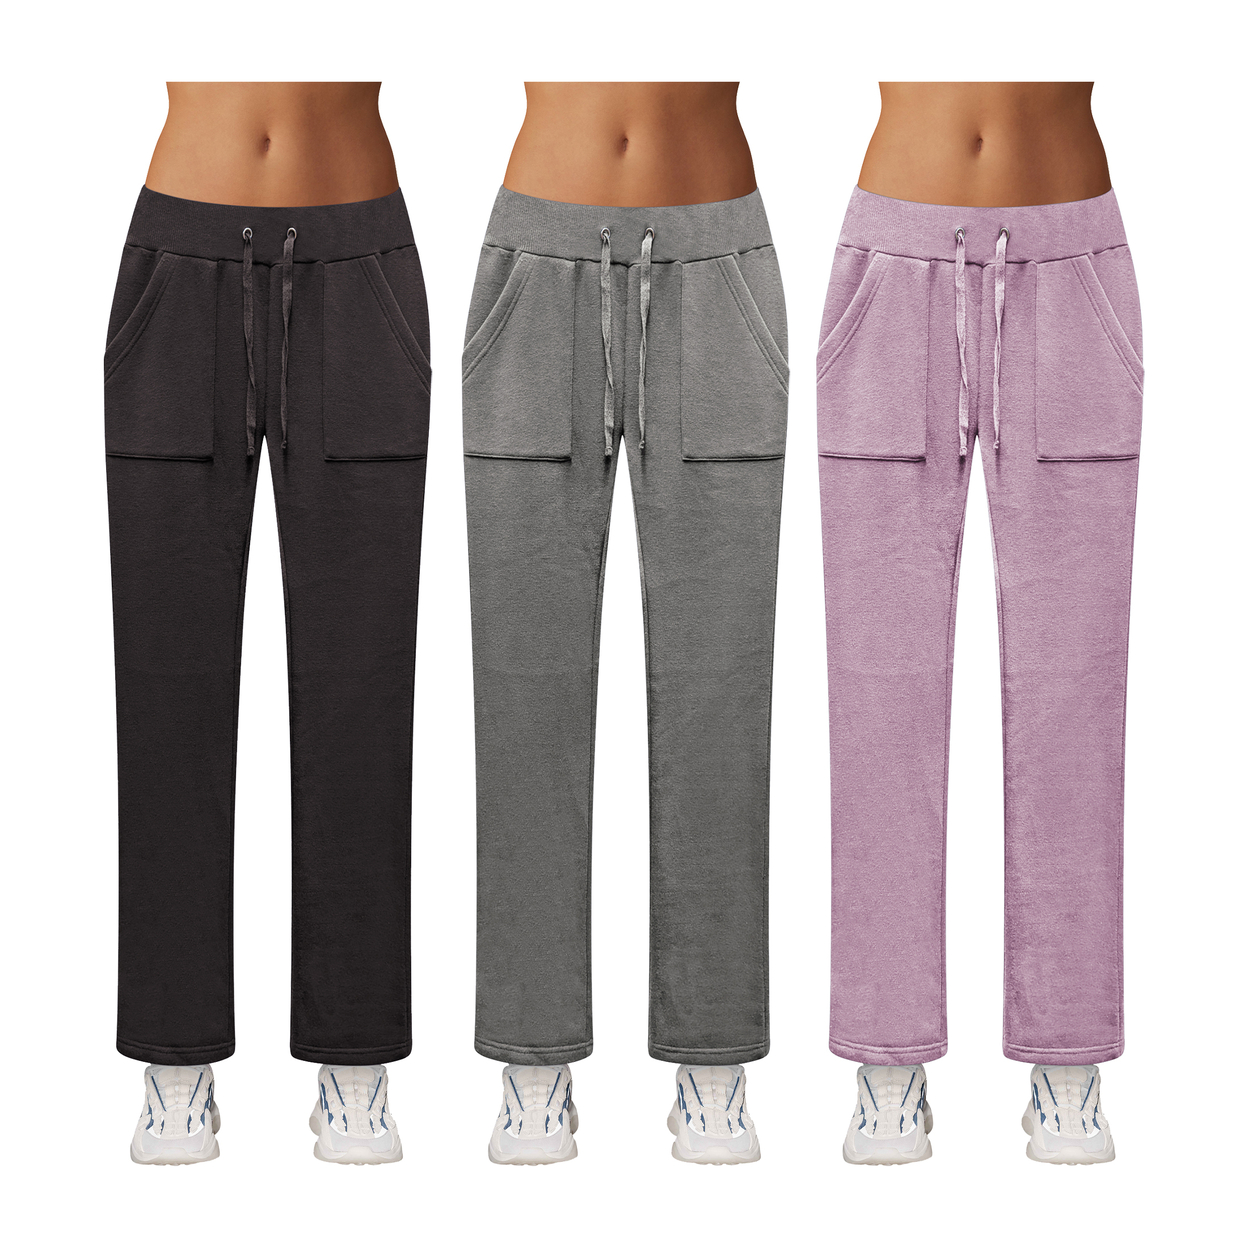 3-Pack: Women's Ultra-Soft Cozy Fleece Lined Elastic Waistband Terry Knit Pants - Xx-large